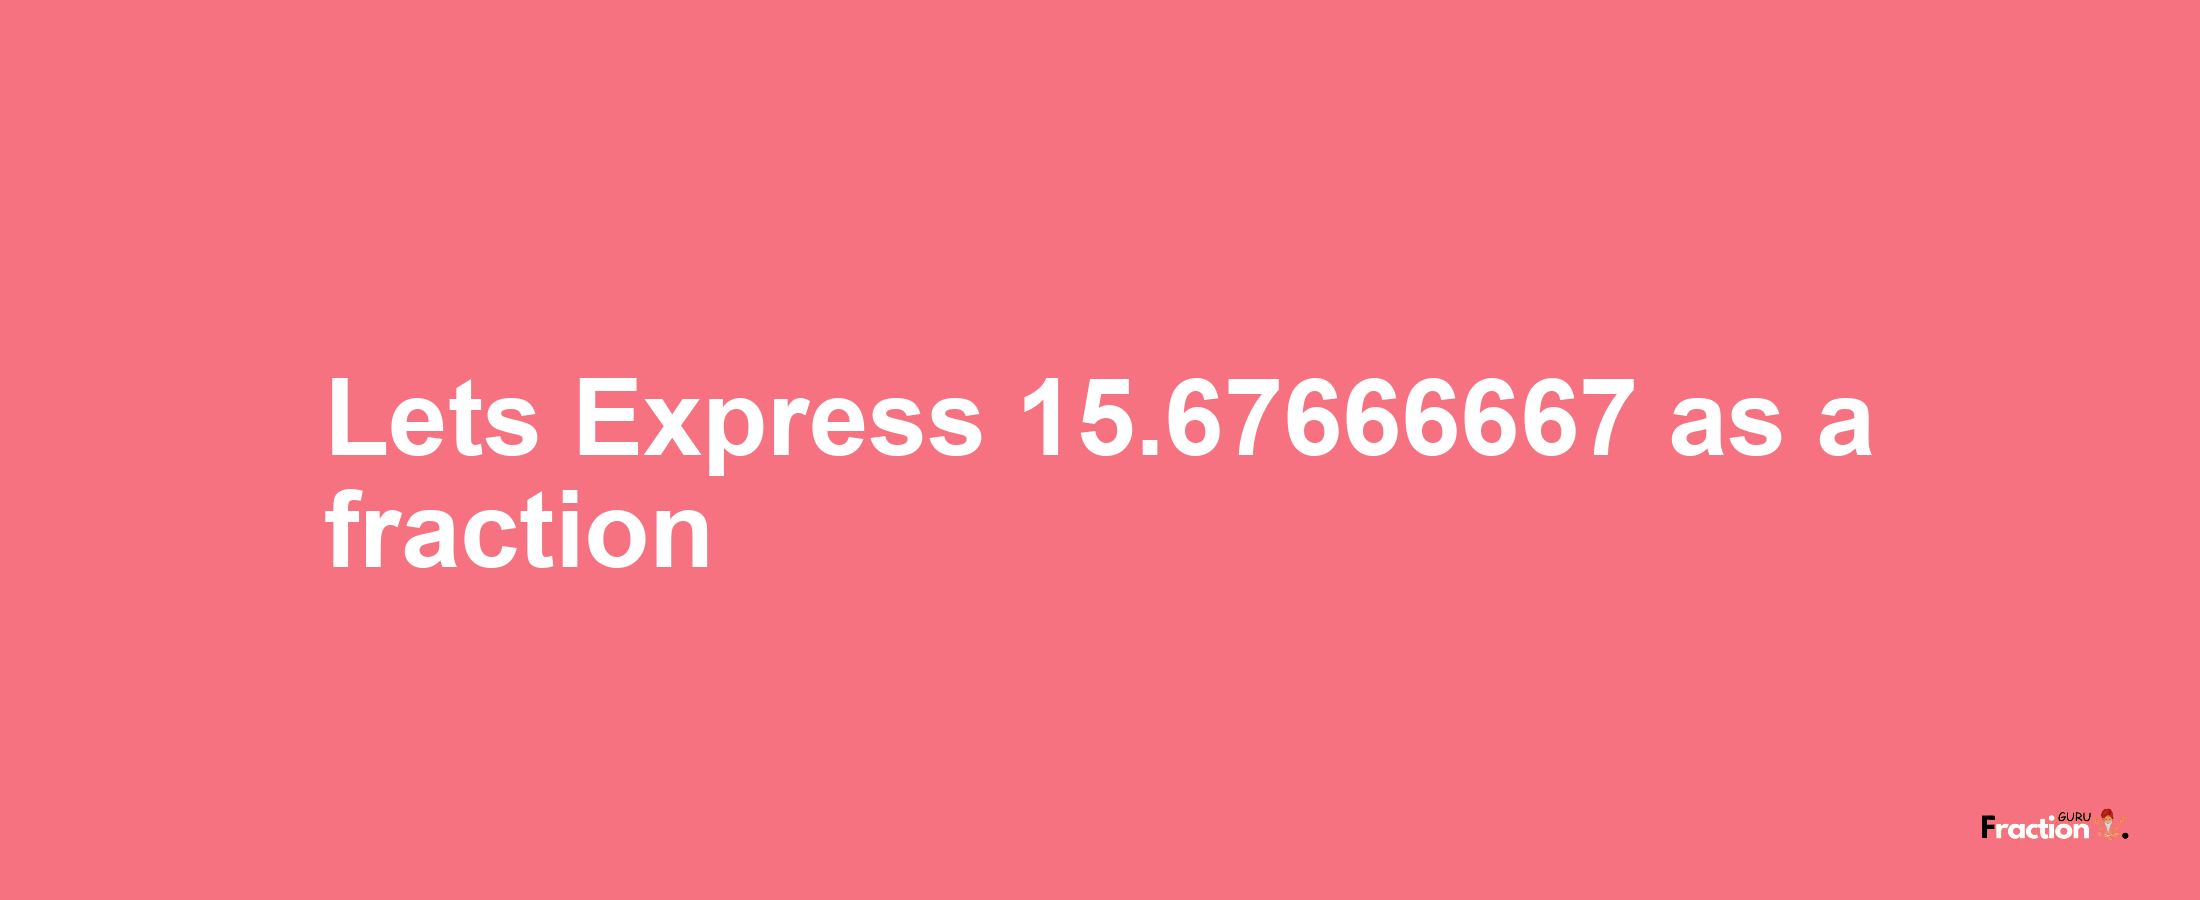 Lets Express 15.67666667 as afraction